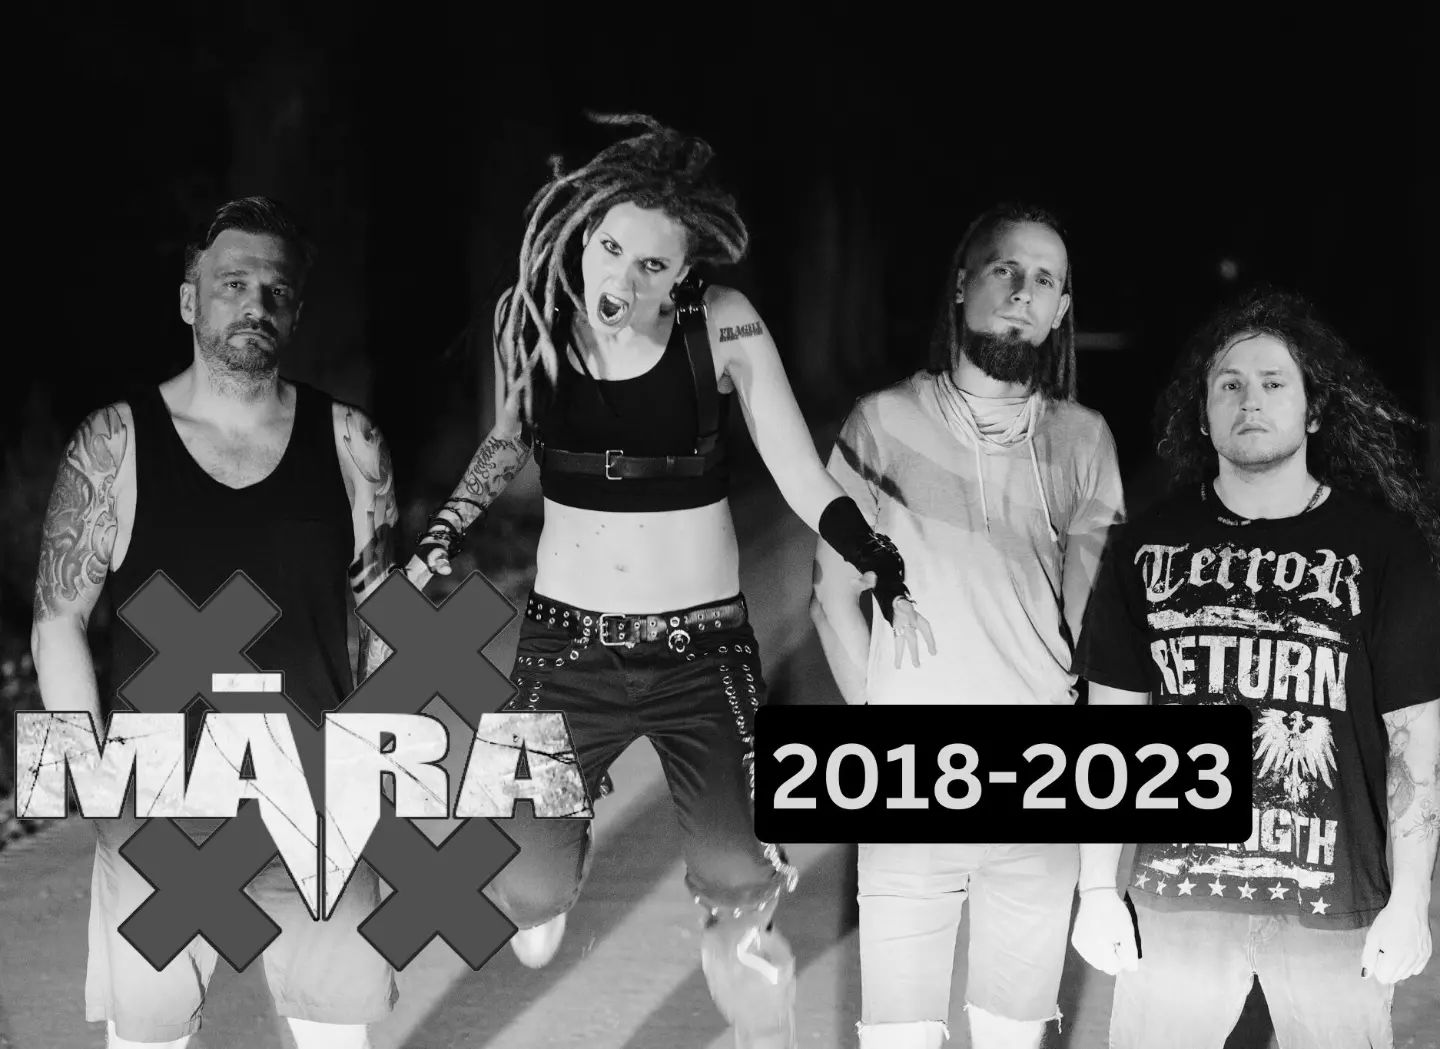 This is the end of MĀRA band